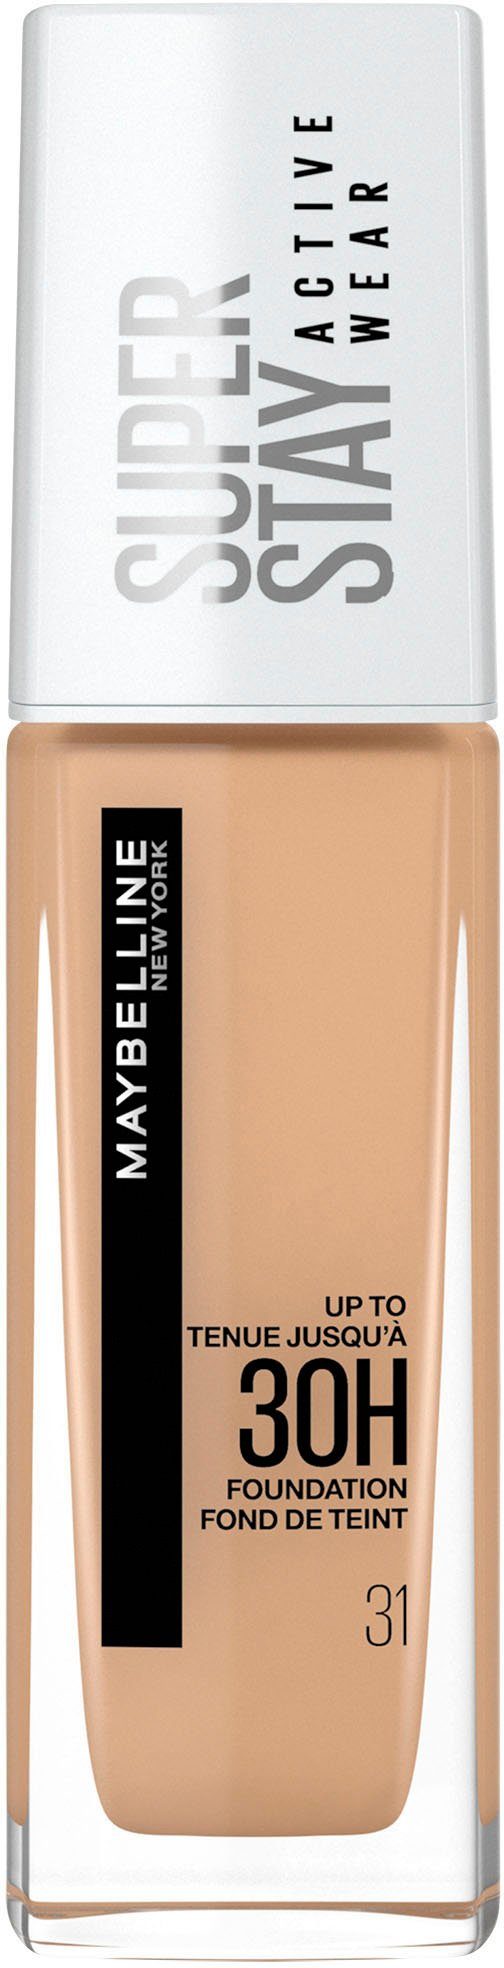 31 Stay Active Foundation Wear Super NEW MAYBELLINE Nude YORK Warm